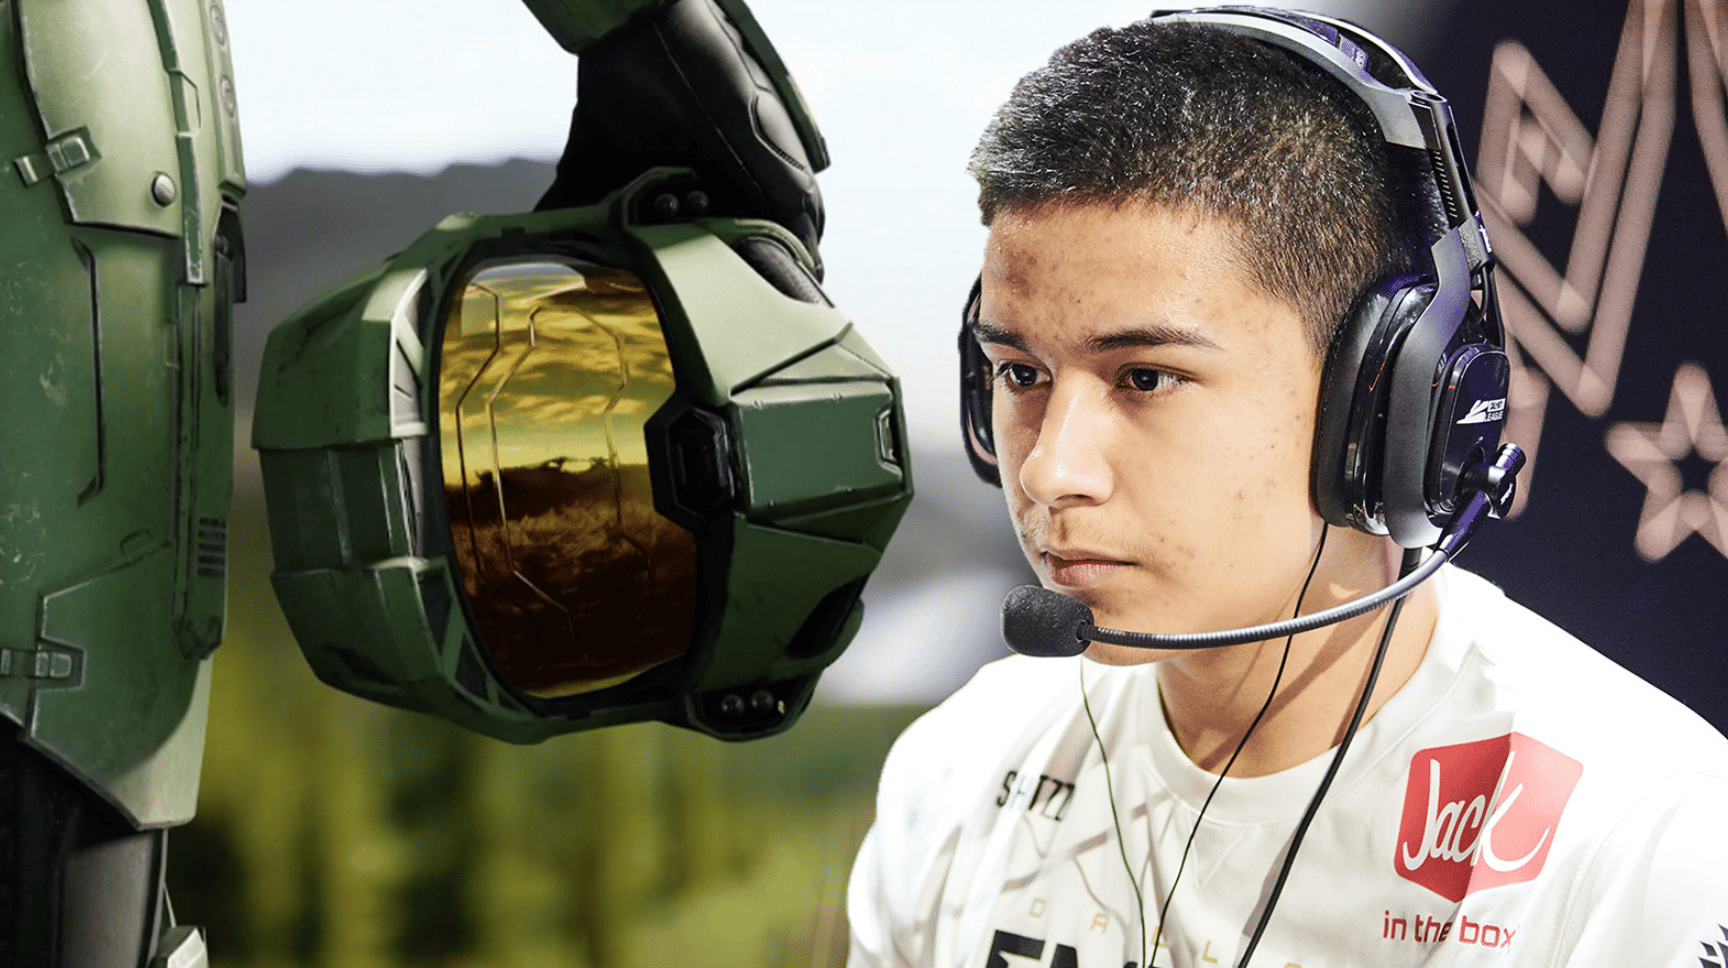 Halo Infinite Master Chief helmet / Call of Duty League pro Shotzzy competing